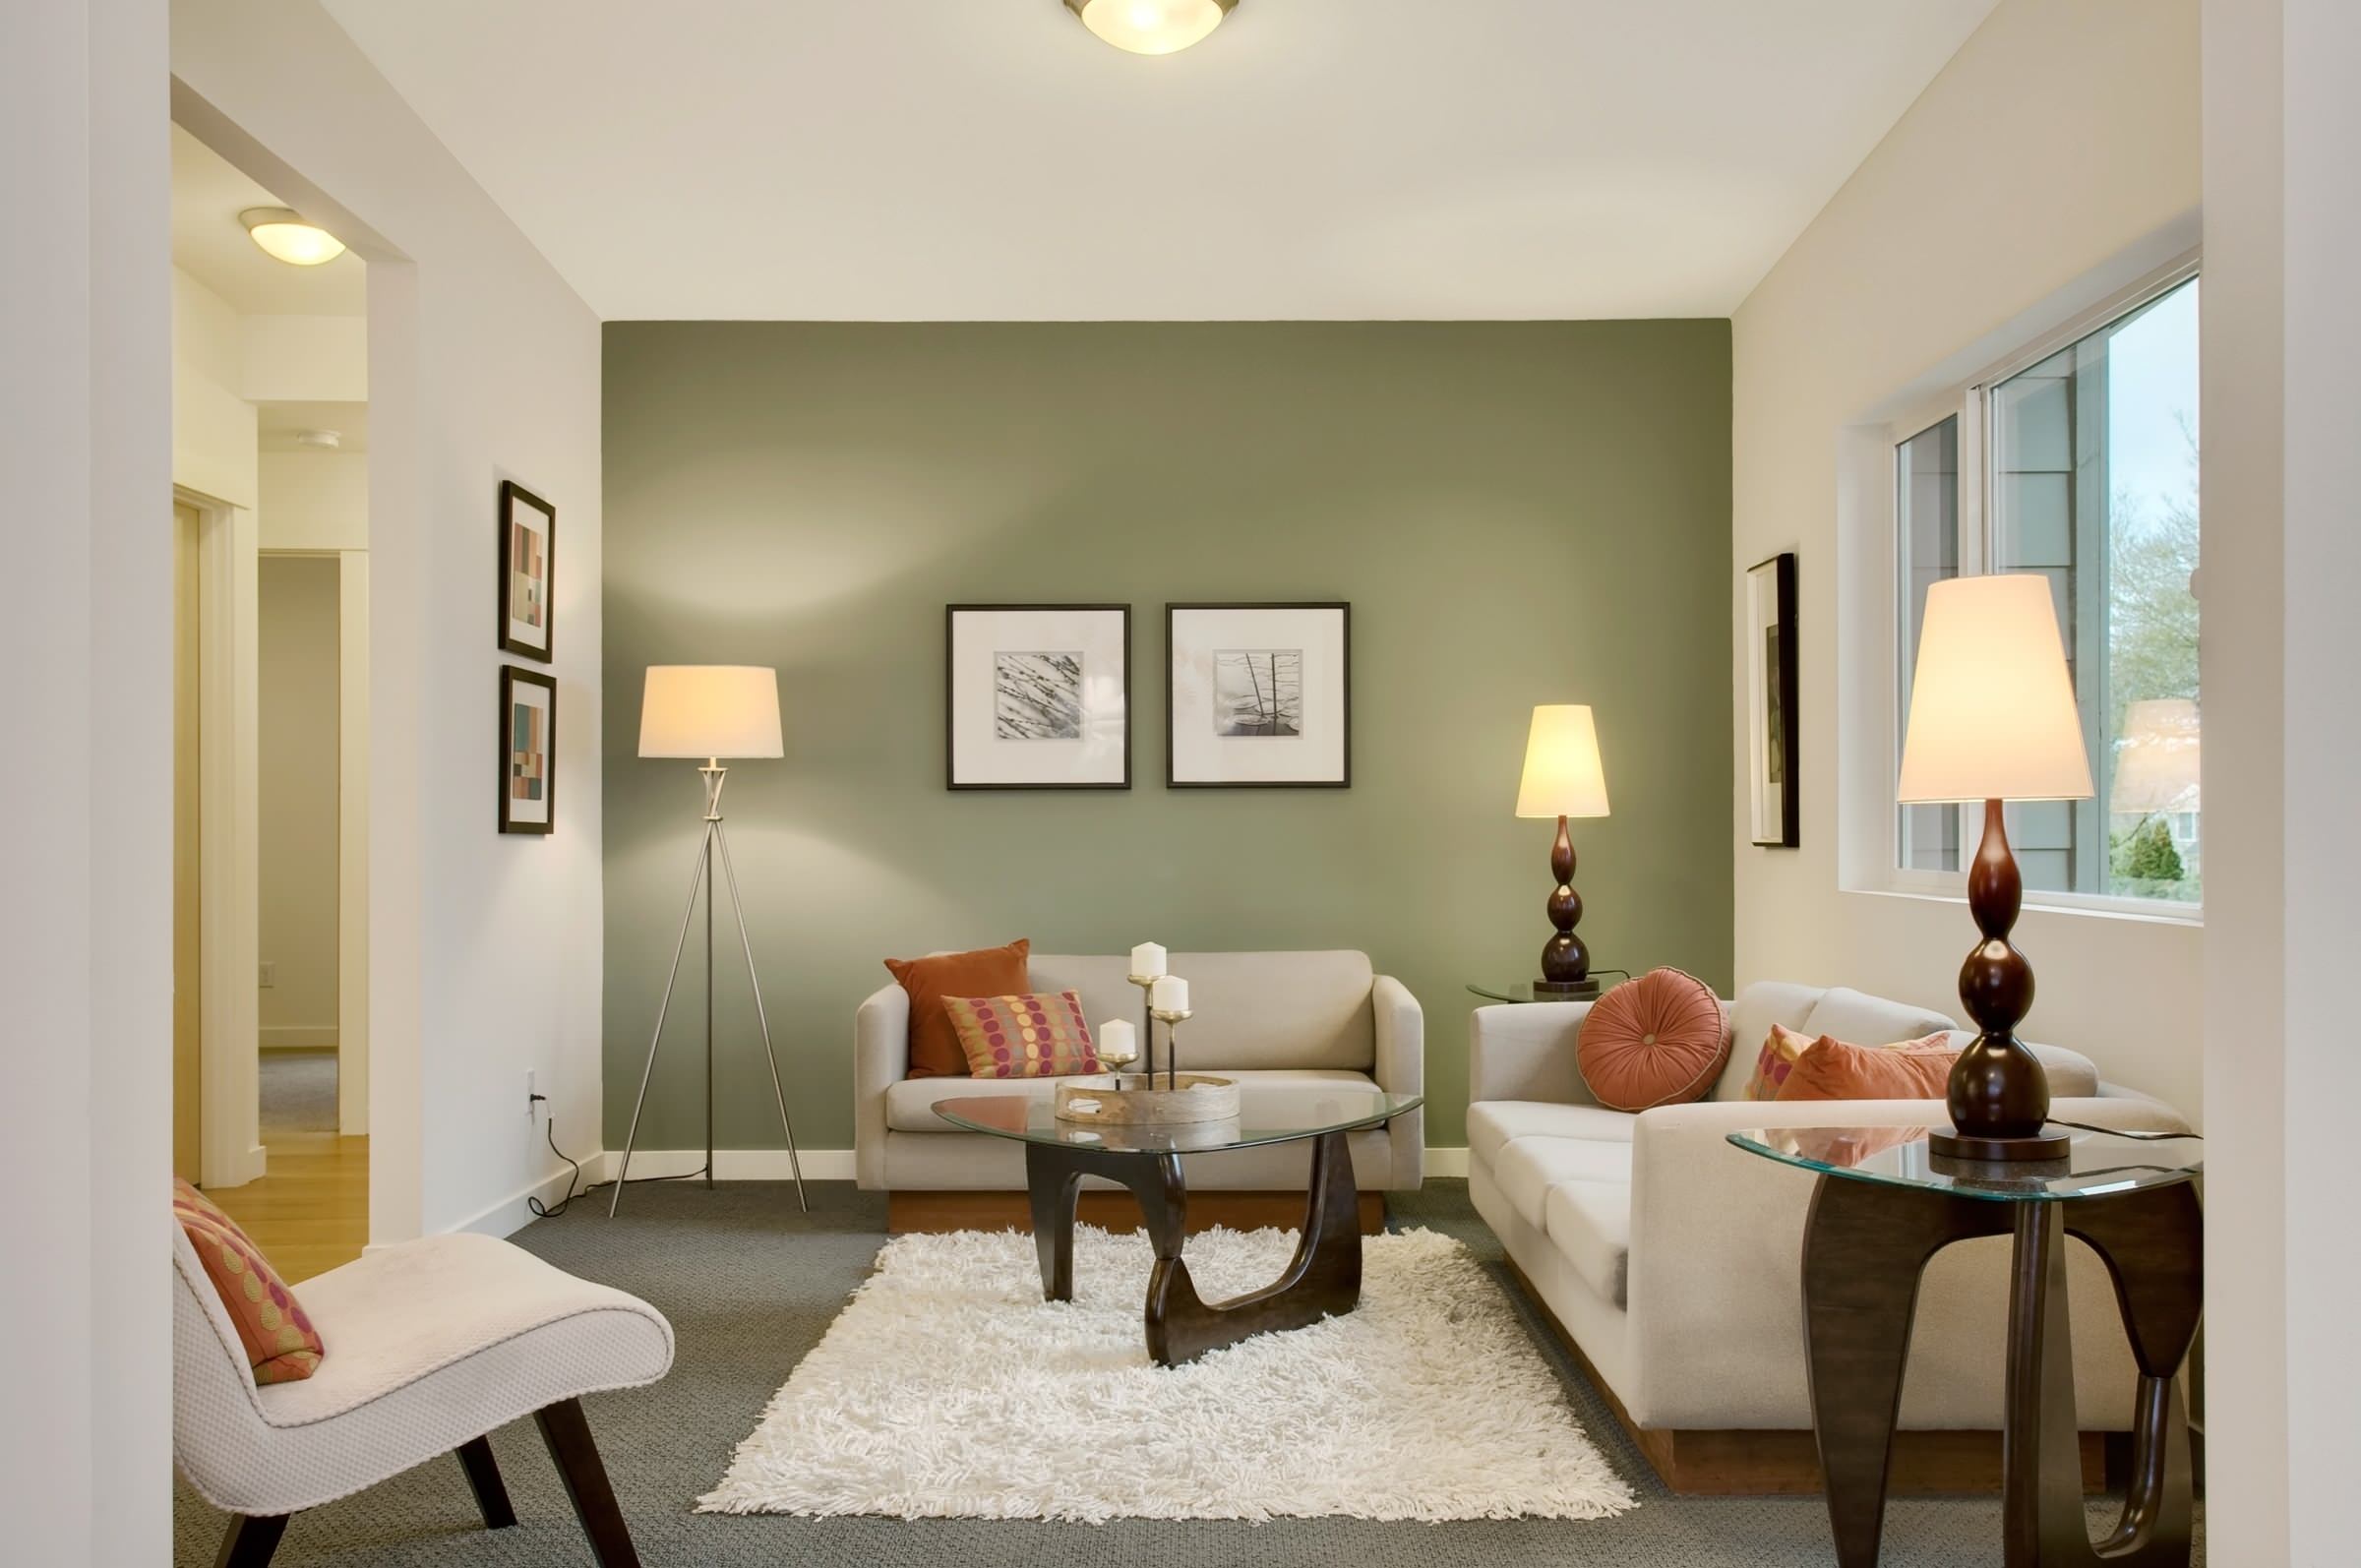 3. Create A Neutral Palette With Muted Greens   Green Living Room Ideas   Evolve India 